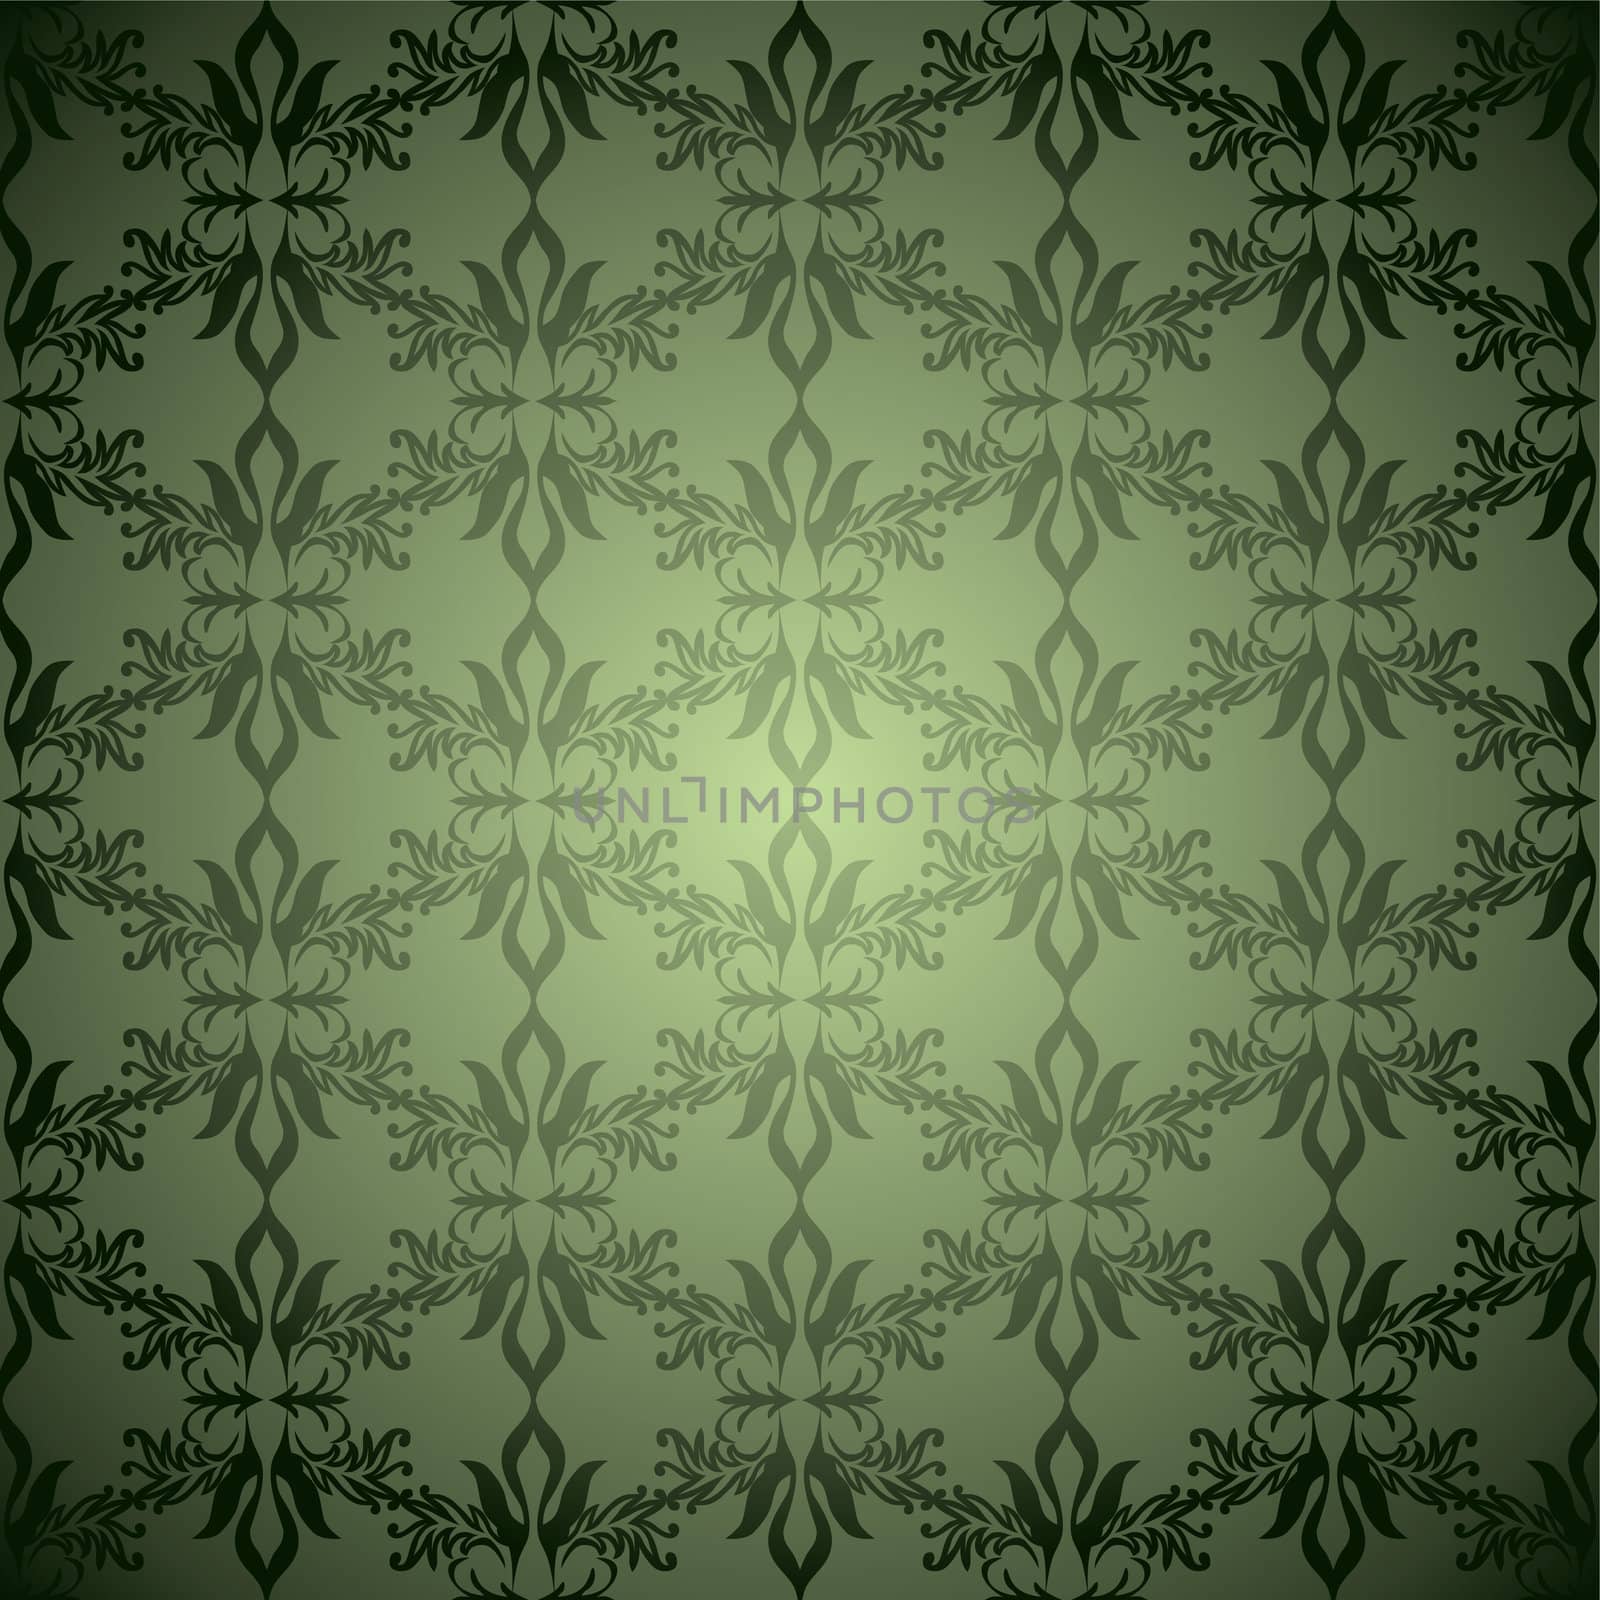 Green and black old fashioned wallpaper design with seamless pattern